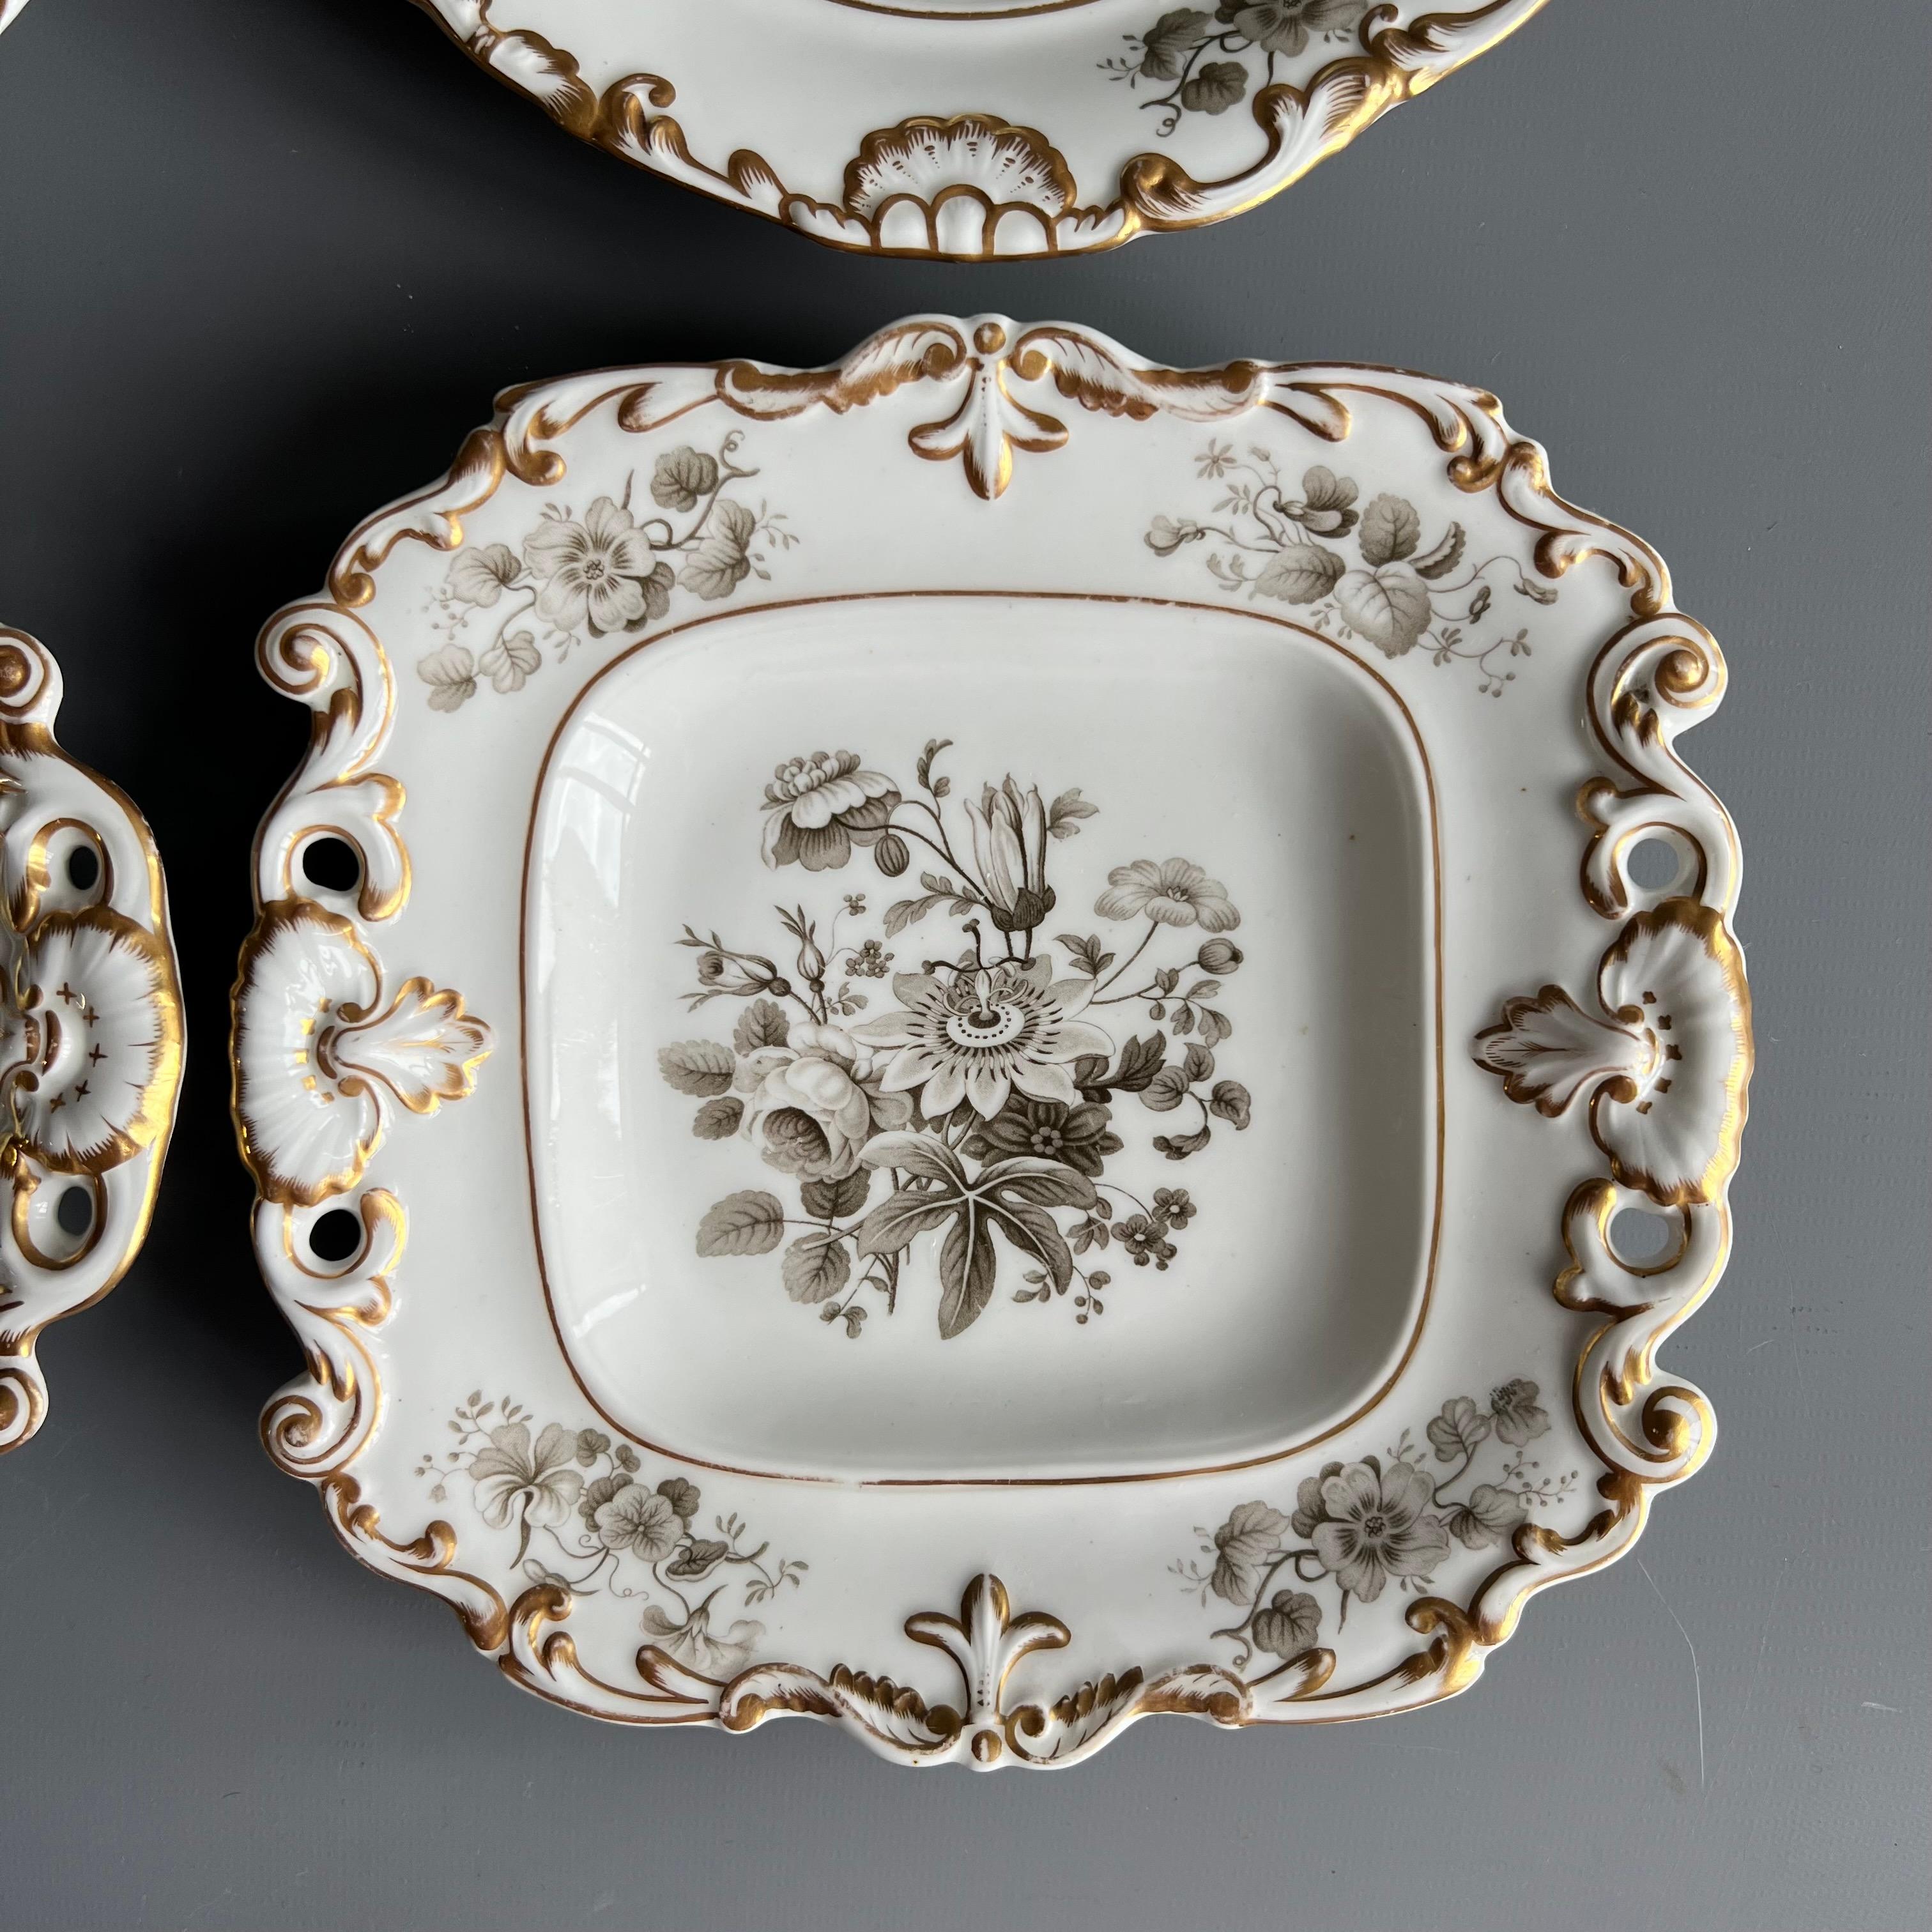 Minton Dessert Service, Inverted Shell White with Monochrome Flowers, ca 1830 For Sale 6